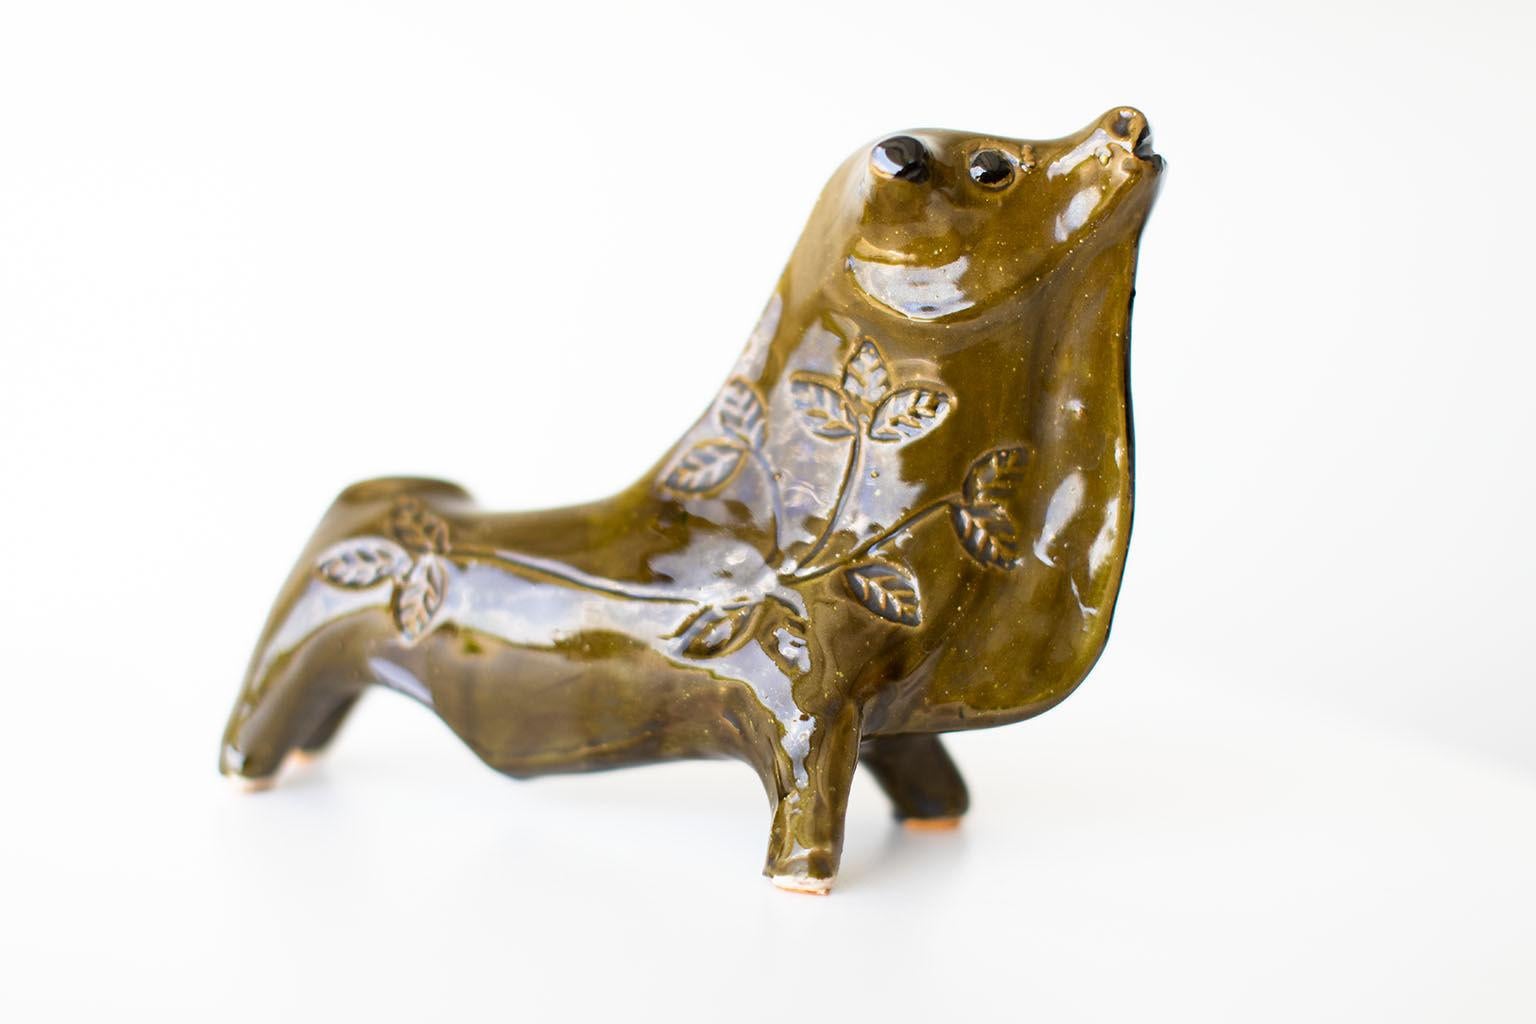 Italian Pottery Bull In Good Condition For Sale In Oak Harbor, OH